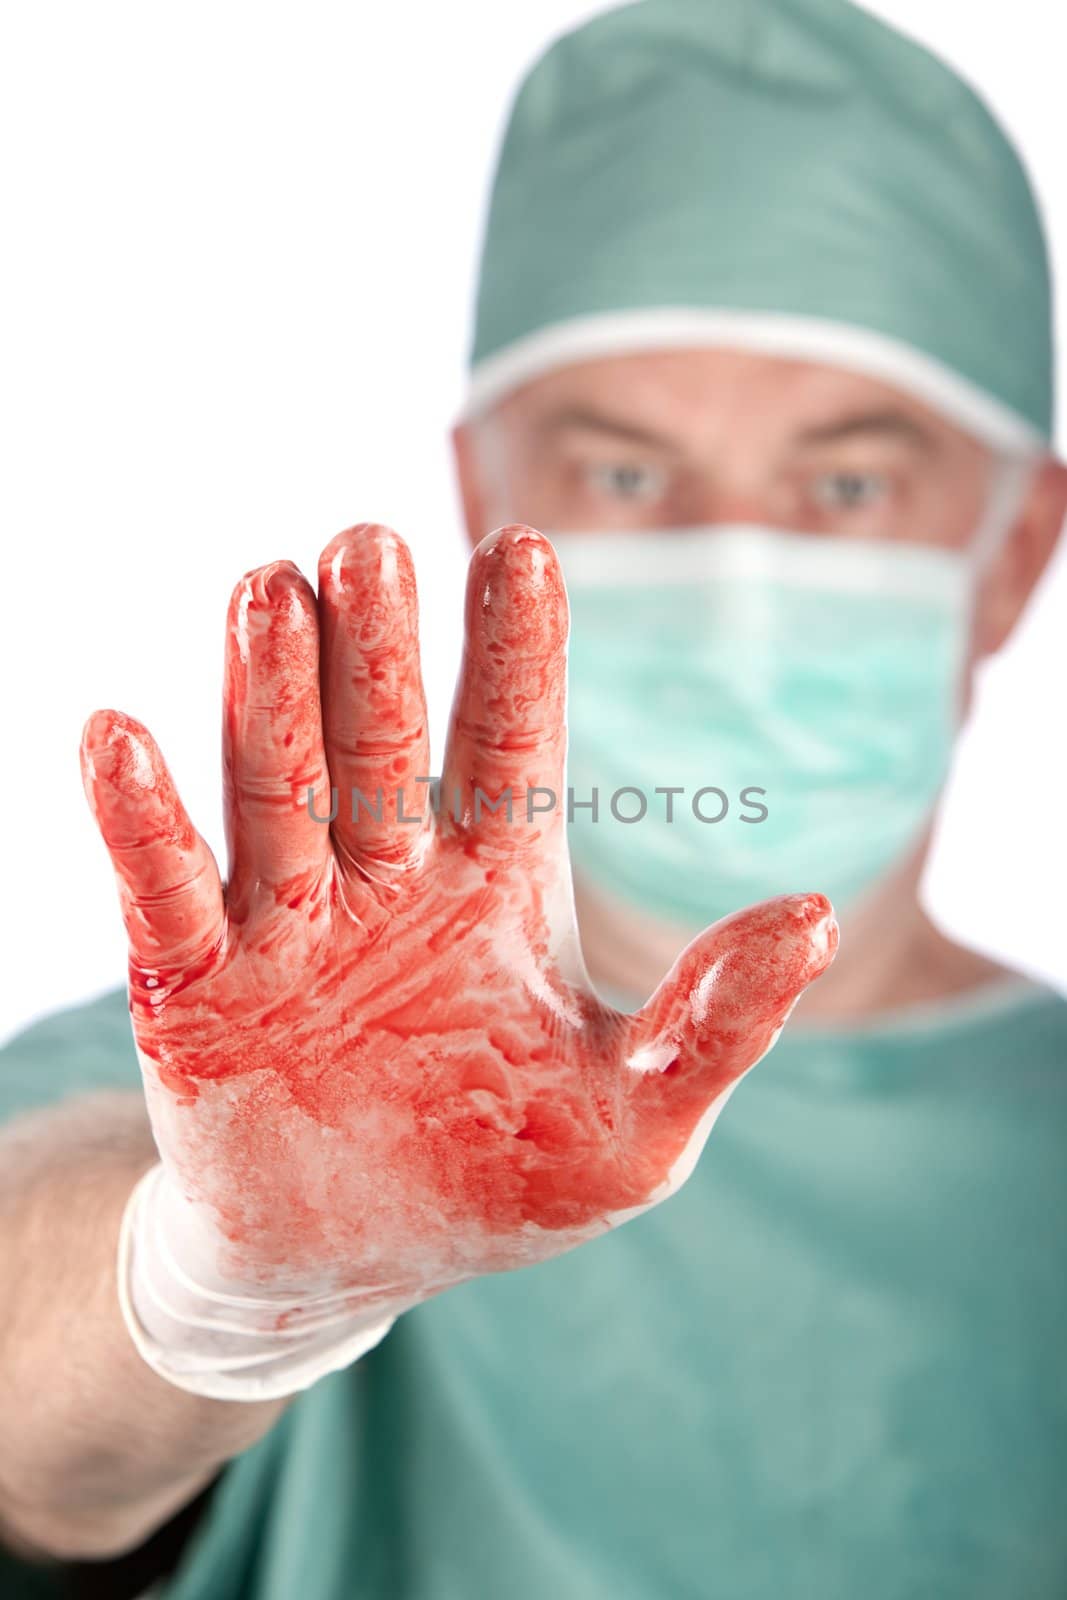 A 60 year old surgeon with bloody hands on a white background.